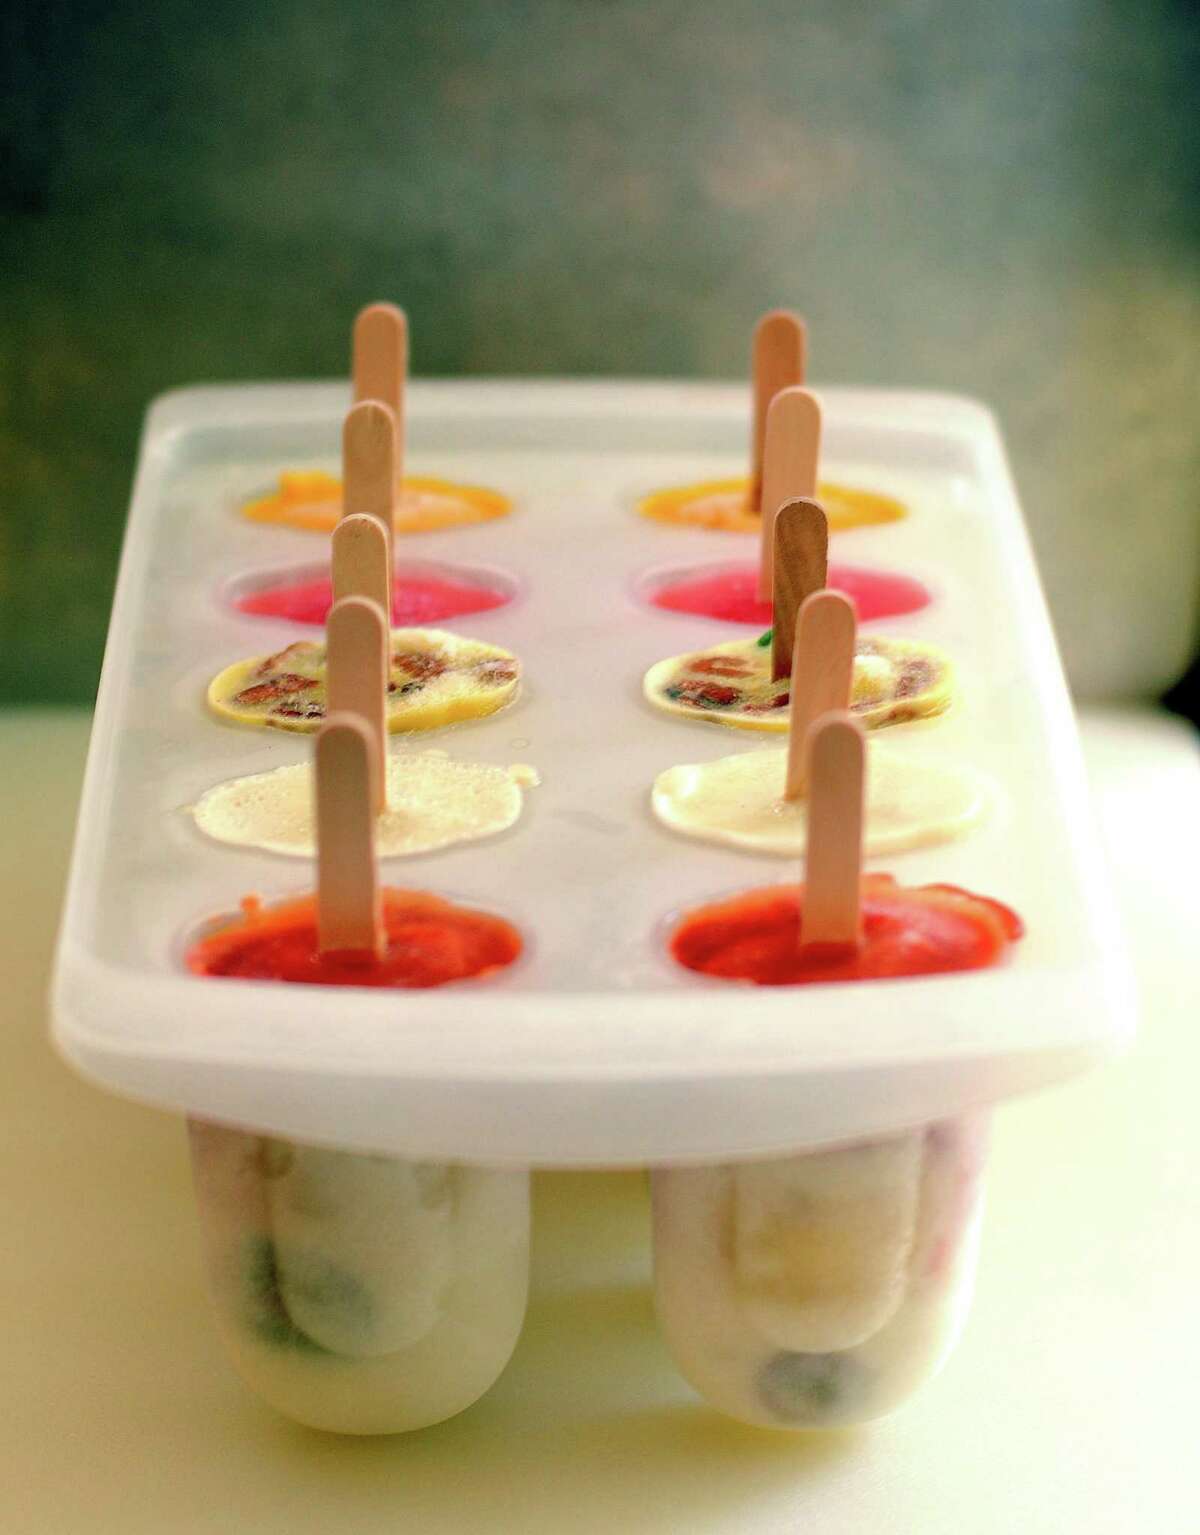 Selection of popsicles made in the Sweet Creations popsicle mold.